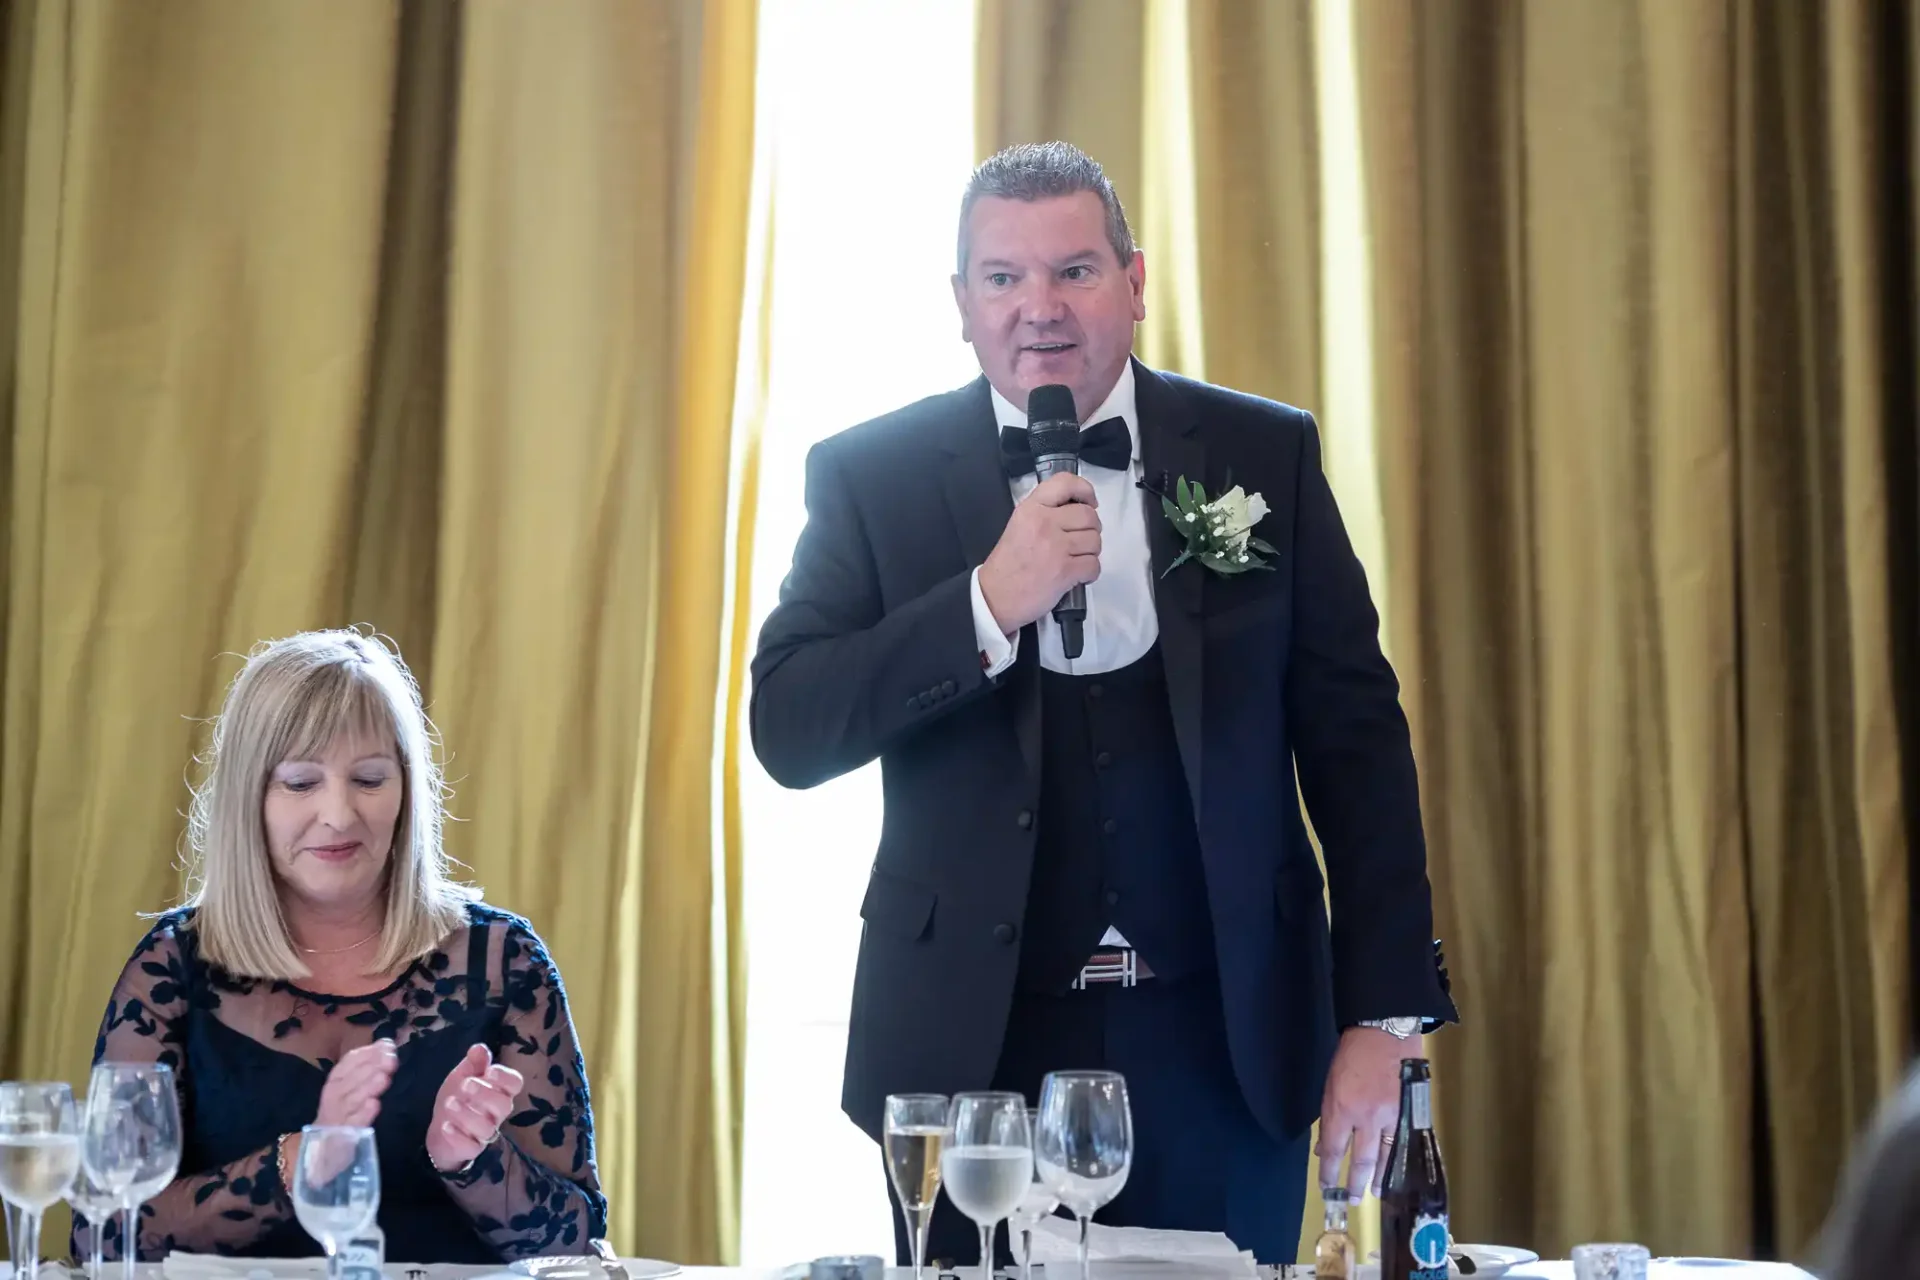 Man in formal attire delivering a speech with a microphone at a wedding reception, with a seated woman nearby.